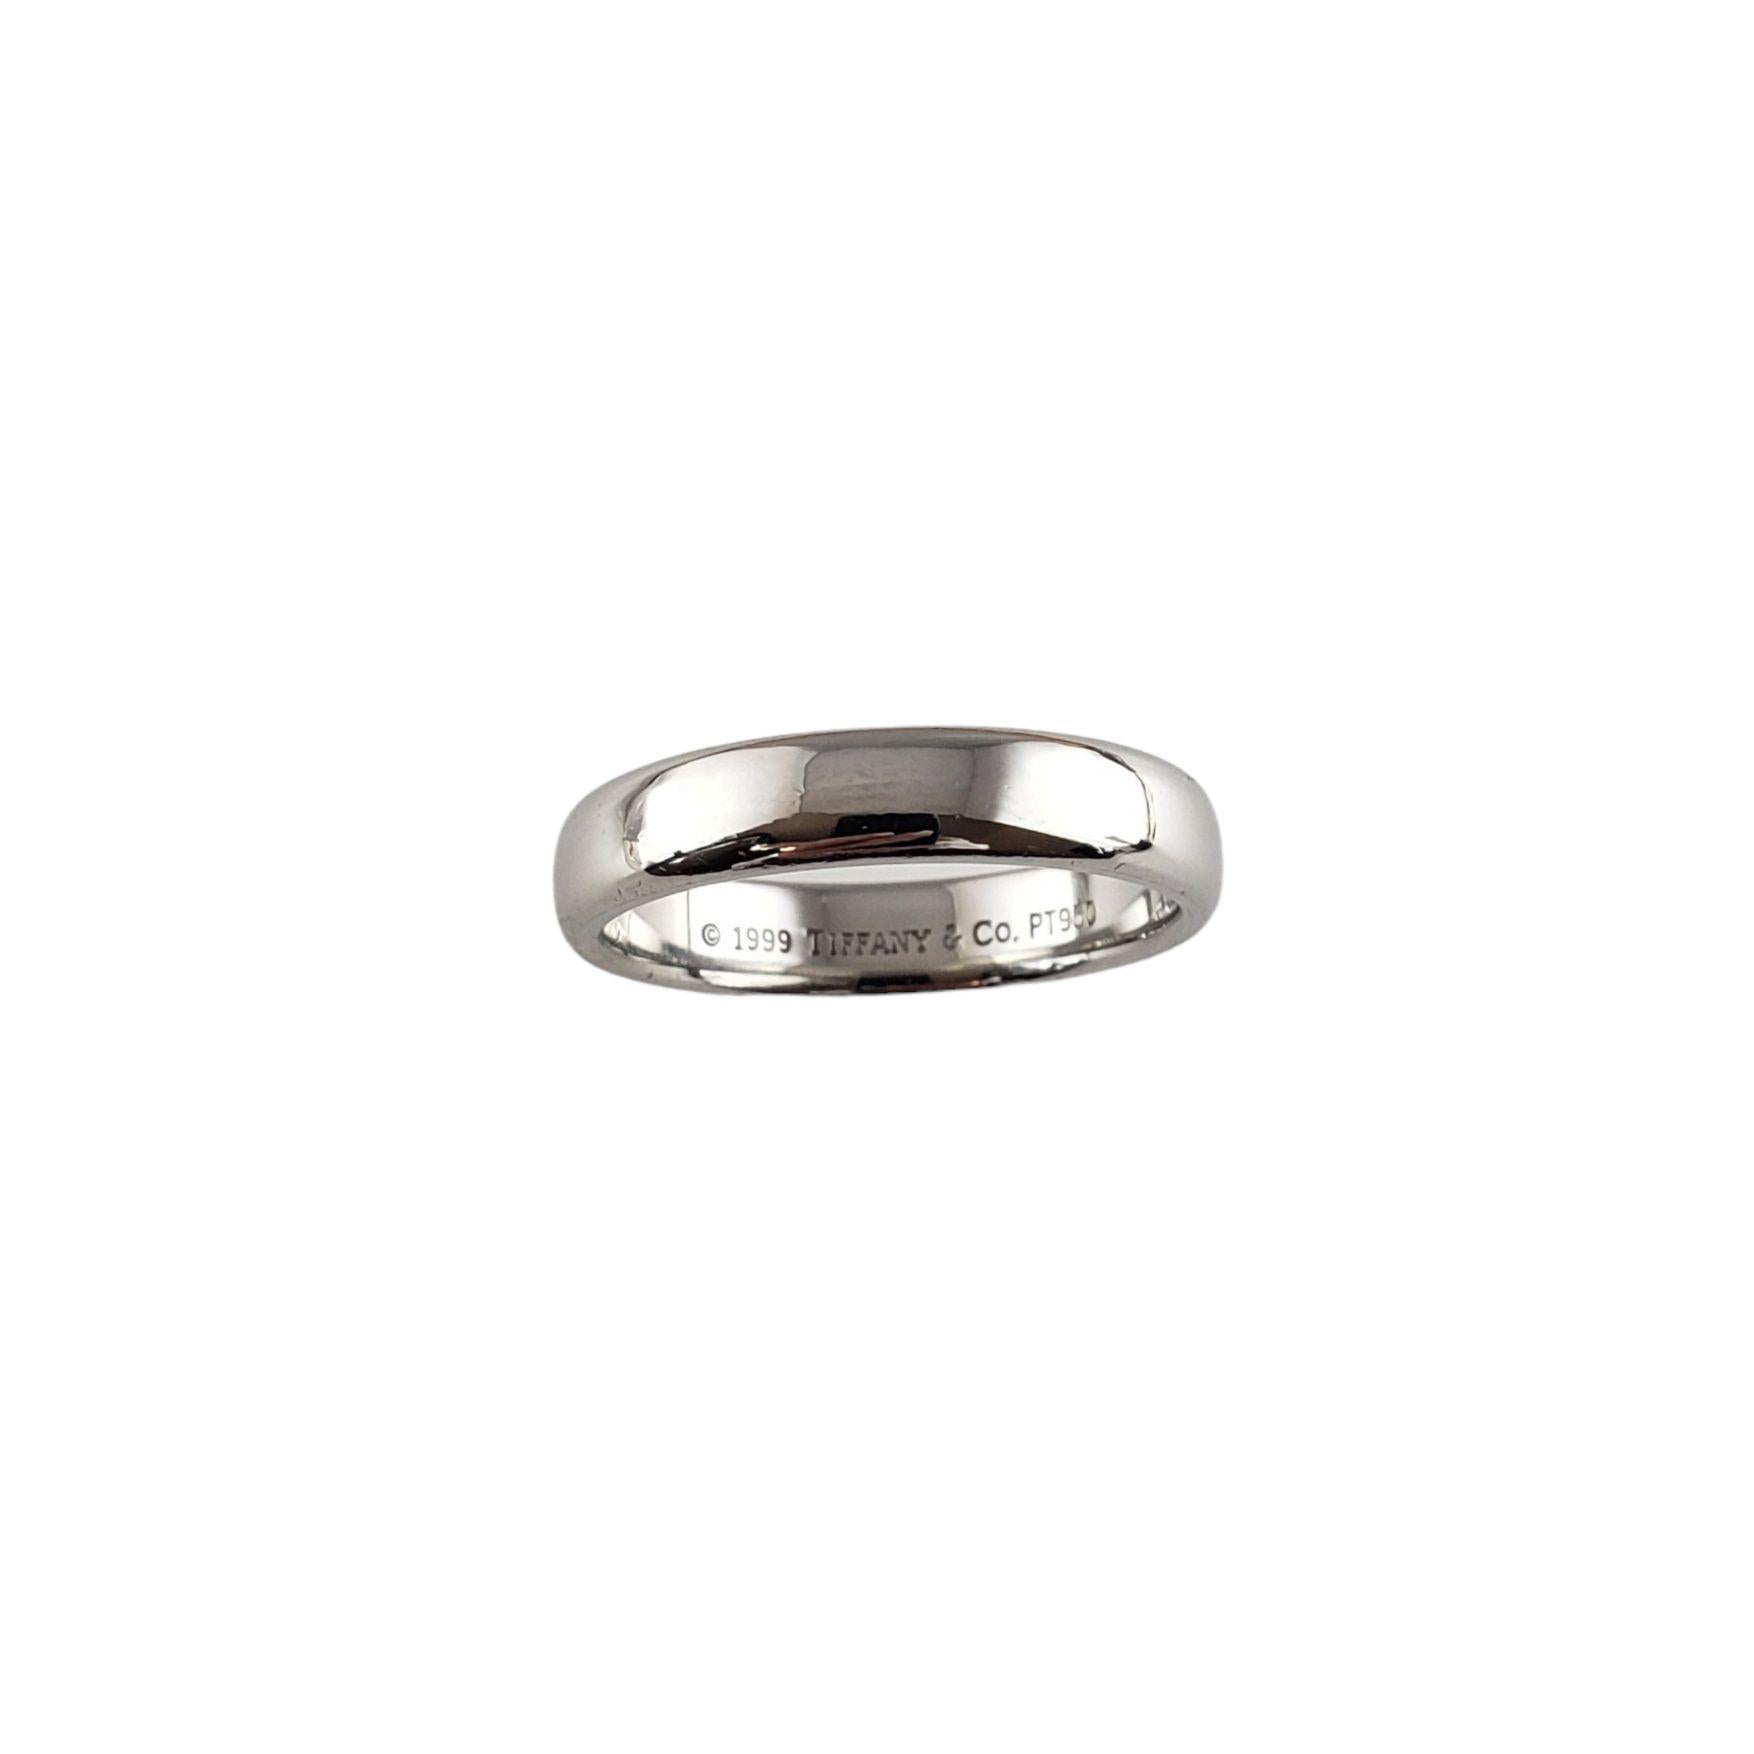 Vintage Tiffany & Co. Platinum Men's Wedding Band Ring Size 9.5-

This elegant band by Tiffany & Col is crafted in classic platinum. Width: 4 mm.

Ring Size: 9.5

Weight: 6.3 dwt. / 9.8 gr.

Hallmark: 1999 TIFFANY & CO. PT 950

Very good condition,